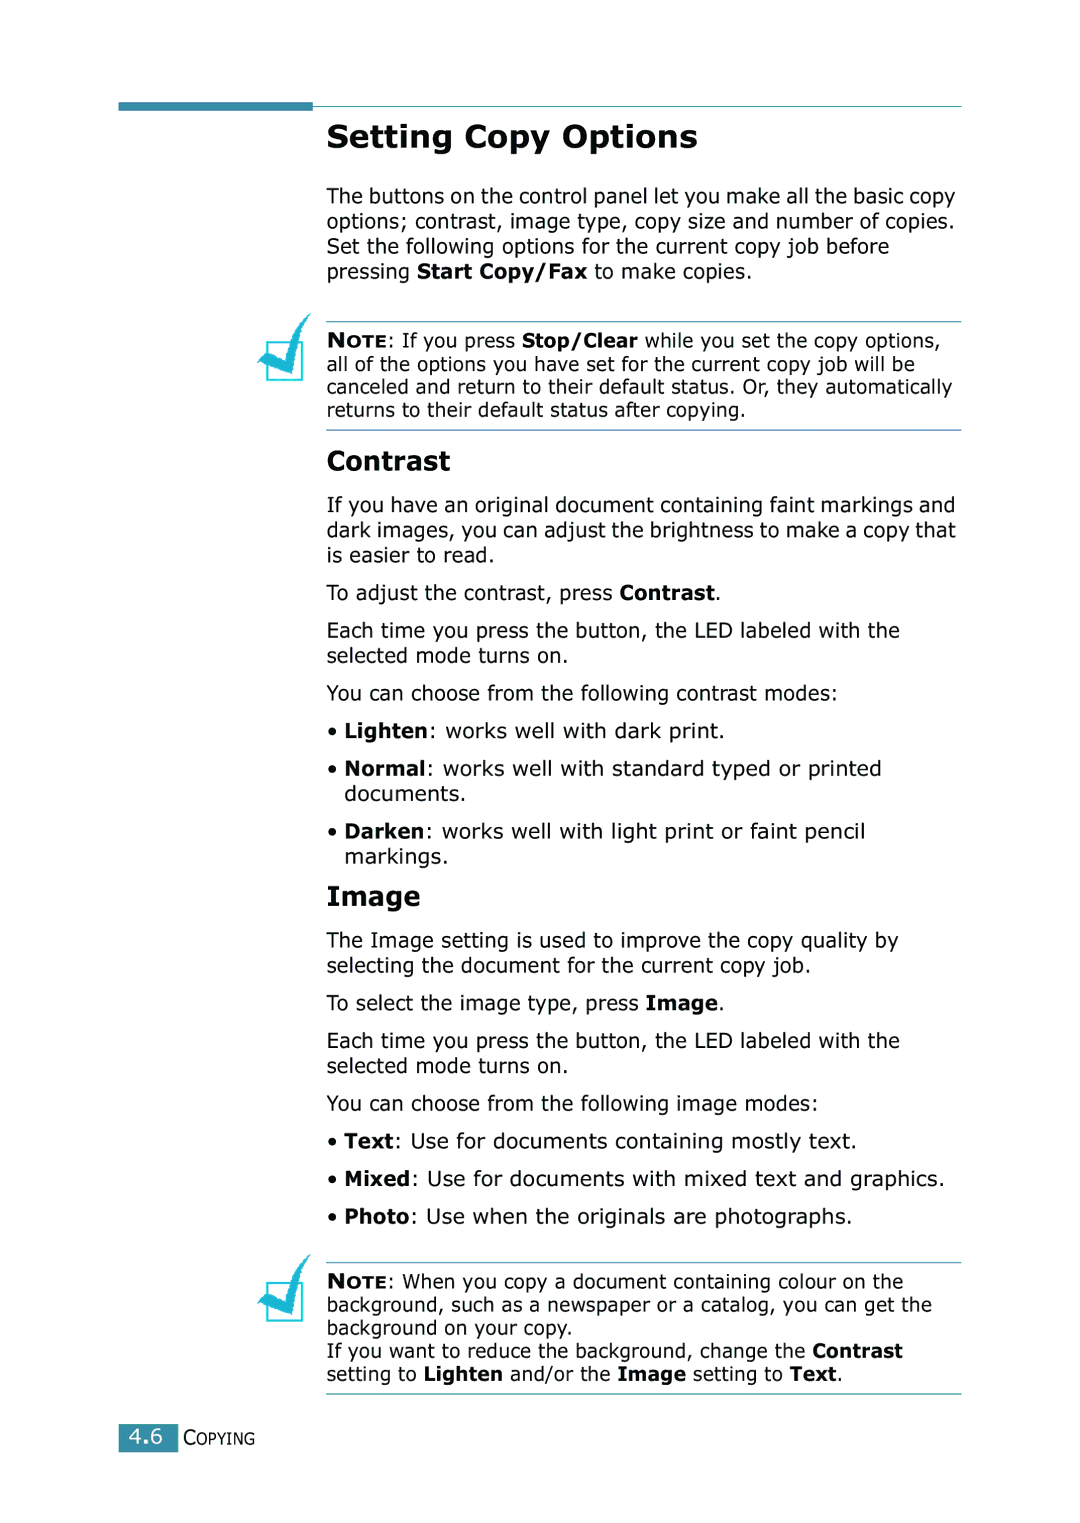 Xerox WorkCentre PE16 manual Setting Copy Options, Contrast, Image 